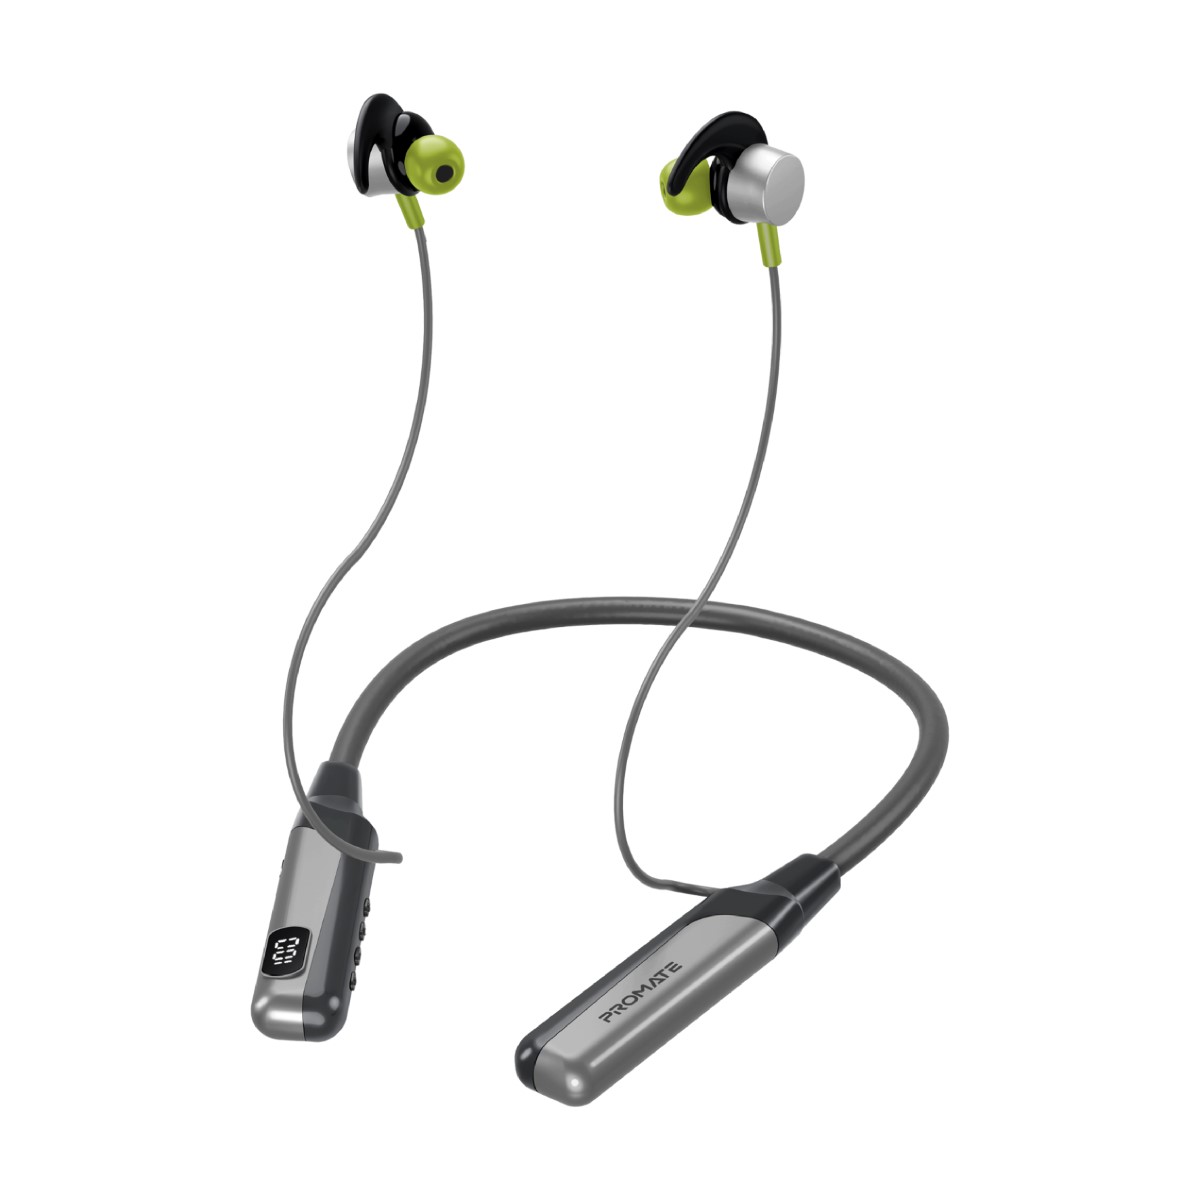 Creative Aurvana Ace 2 Lightweight True Wireless in-Ears with Bluetooth LE Audio, aptX Lossless, and xMEMS Driver, aptX Adaptive, Adaptive ANC, Ambient Mode, Up to 24 Hours Battery Life, Built-in Mic